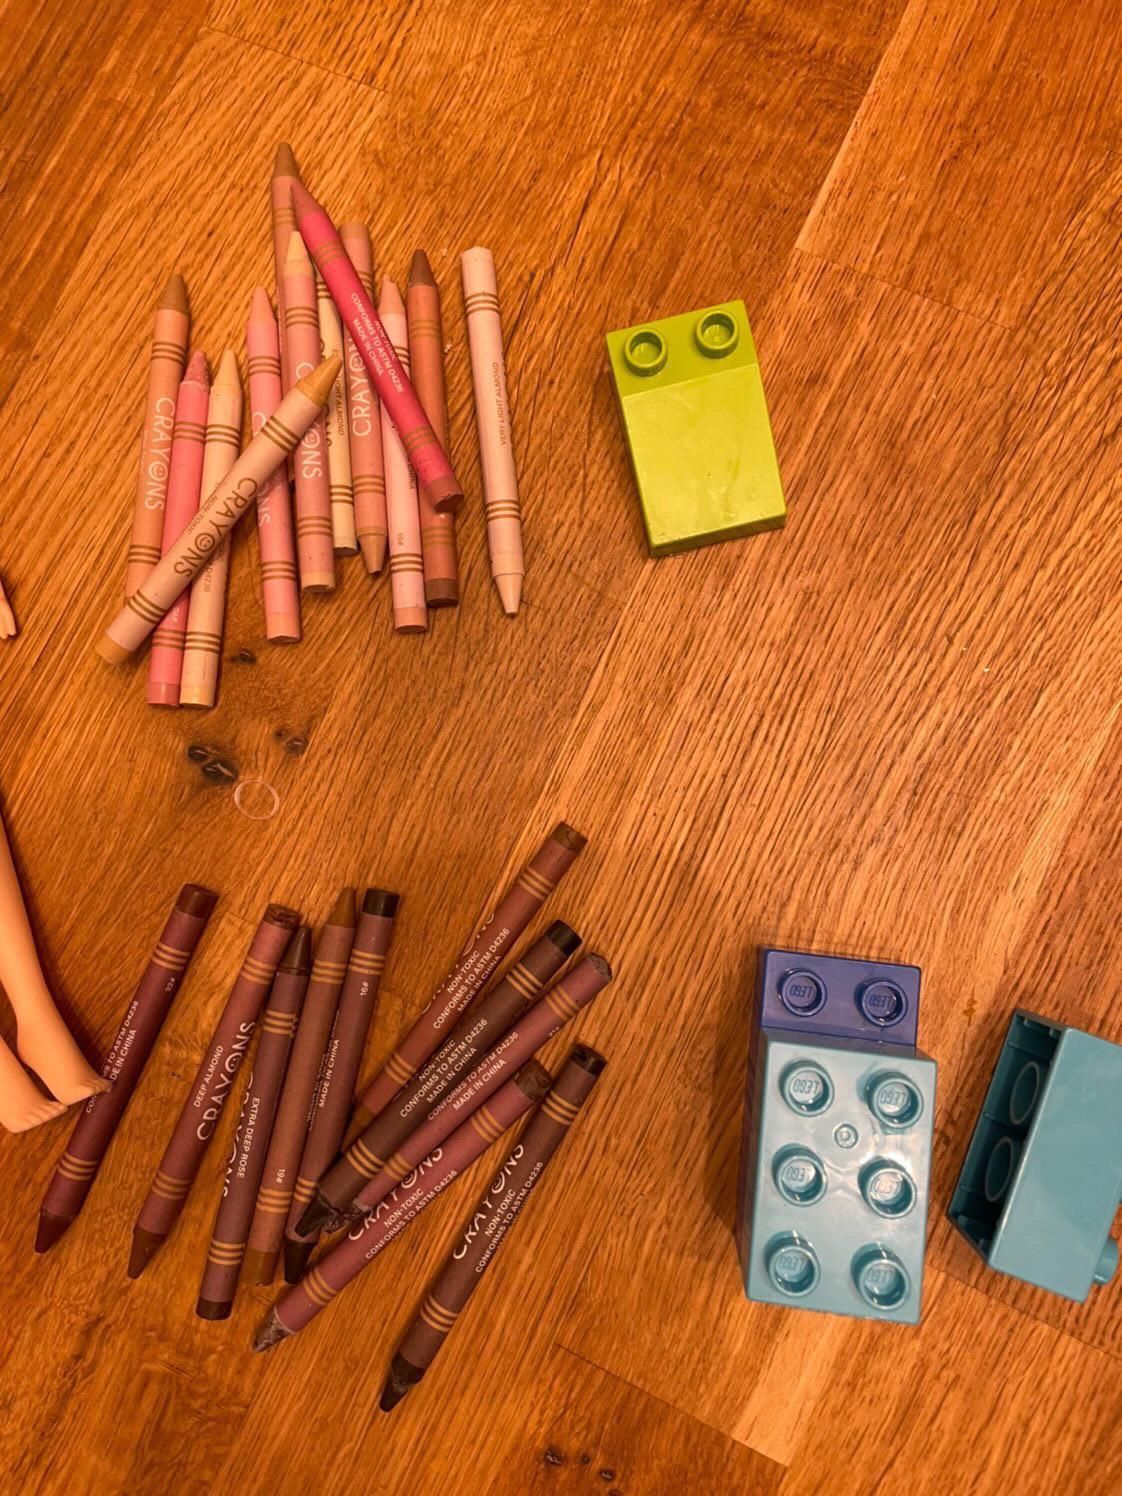 We got my niece “diversity” crayons! And she… segregated them.